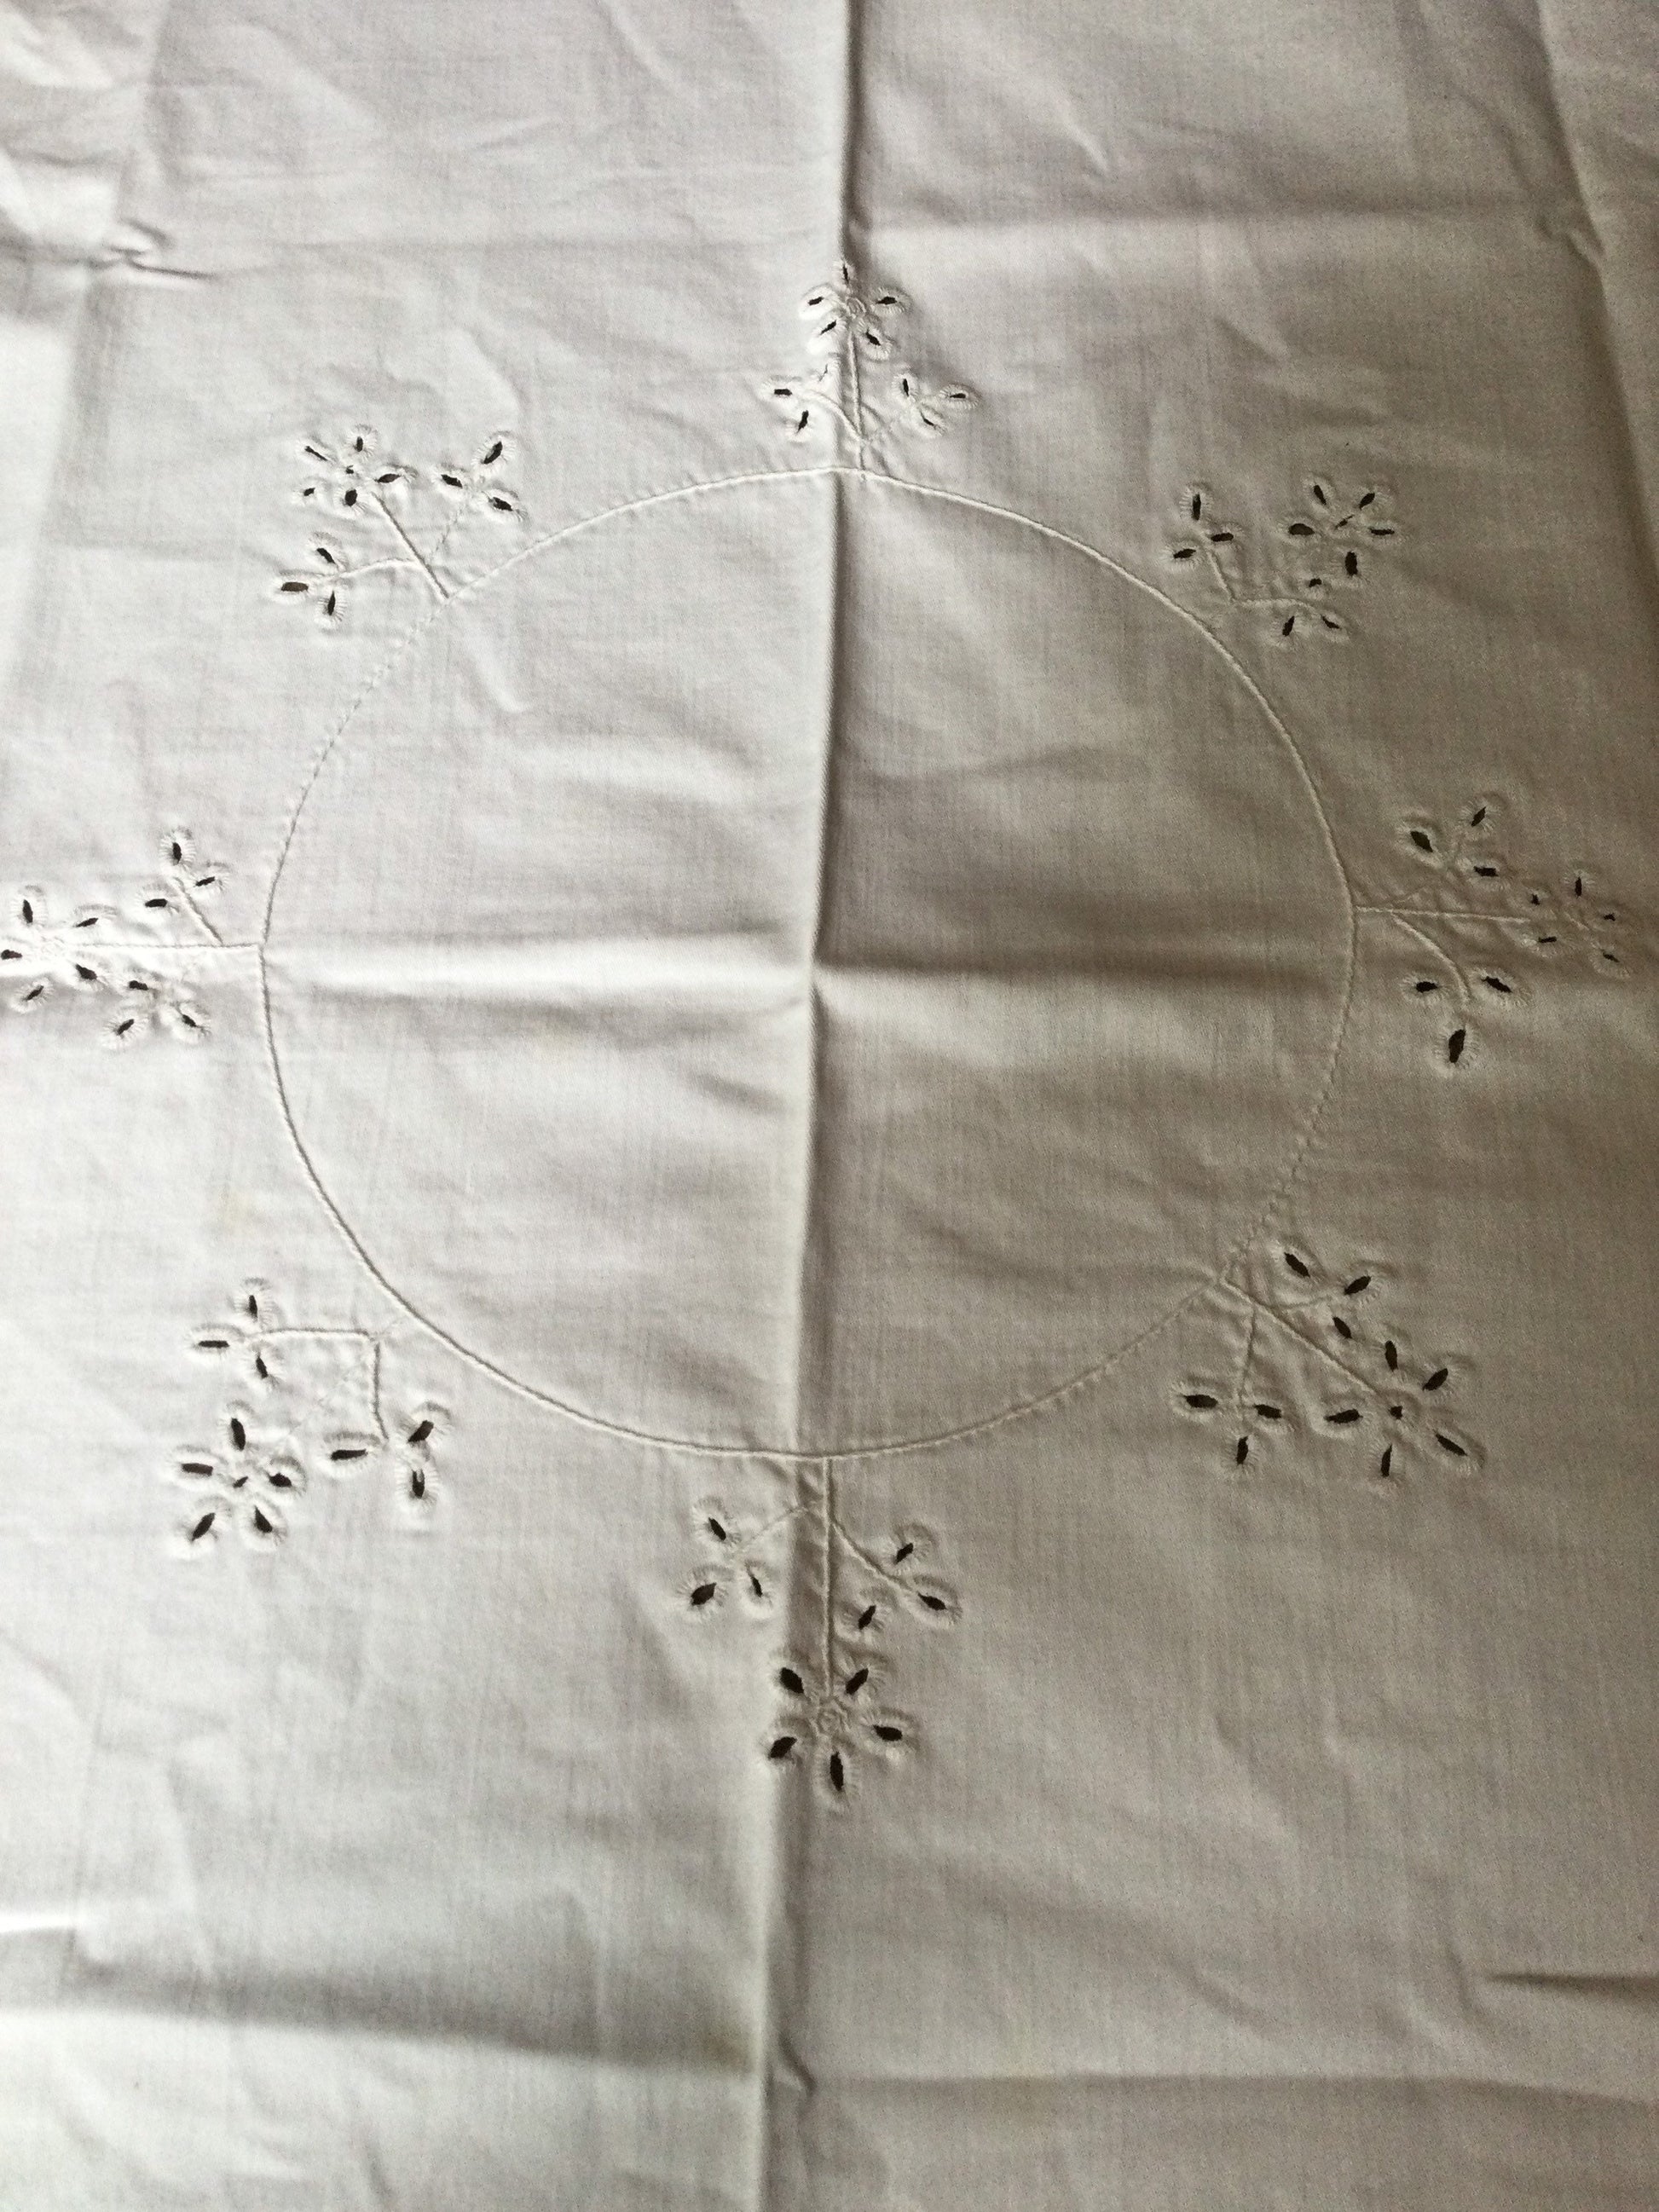 33” square Antique vintage heavy linen table cloth white square cut out embroidered floral tablecloth embroidery